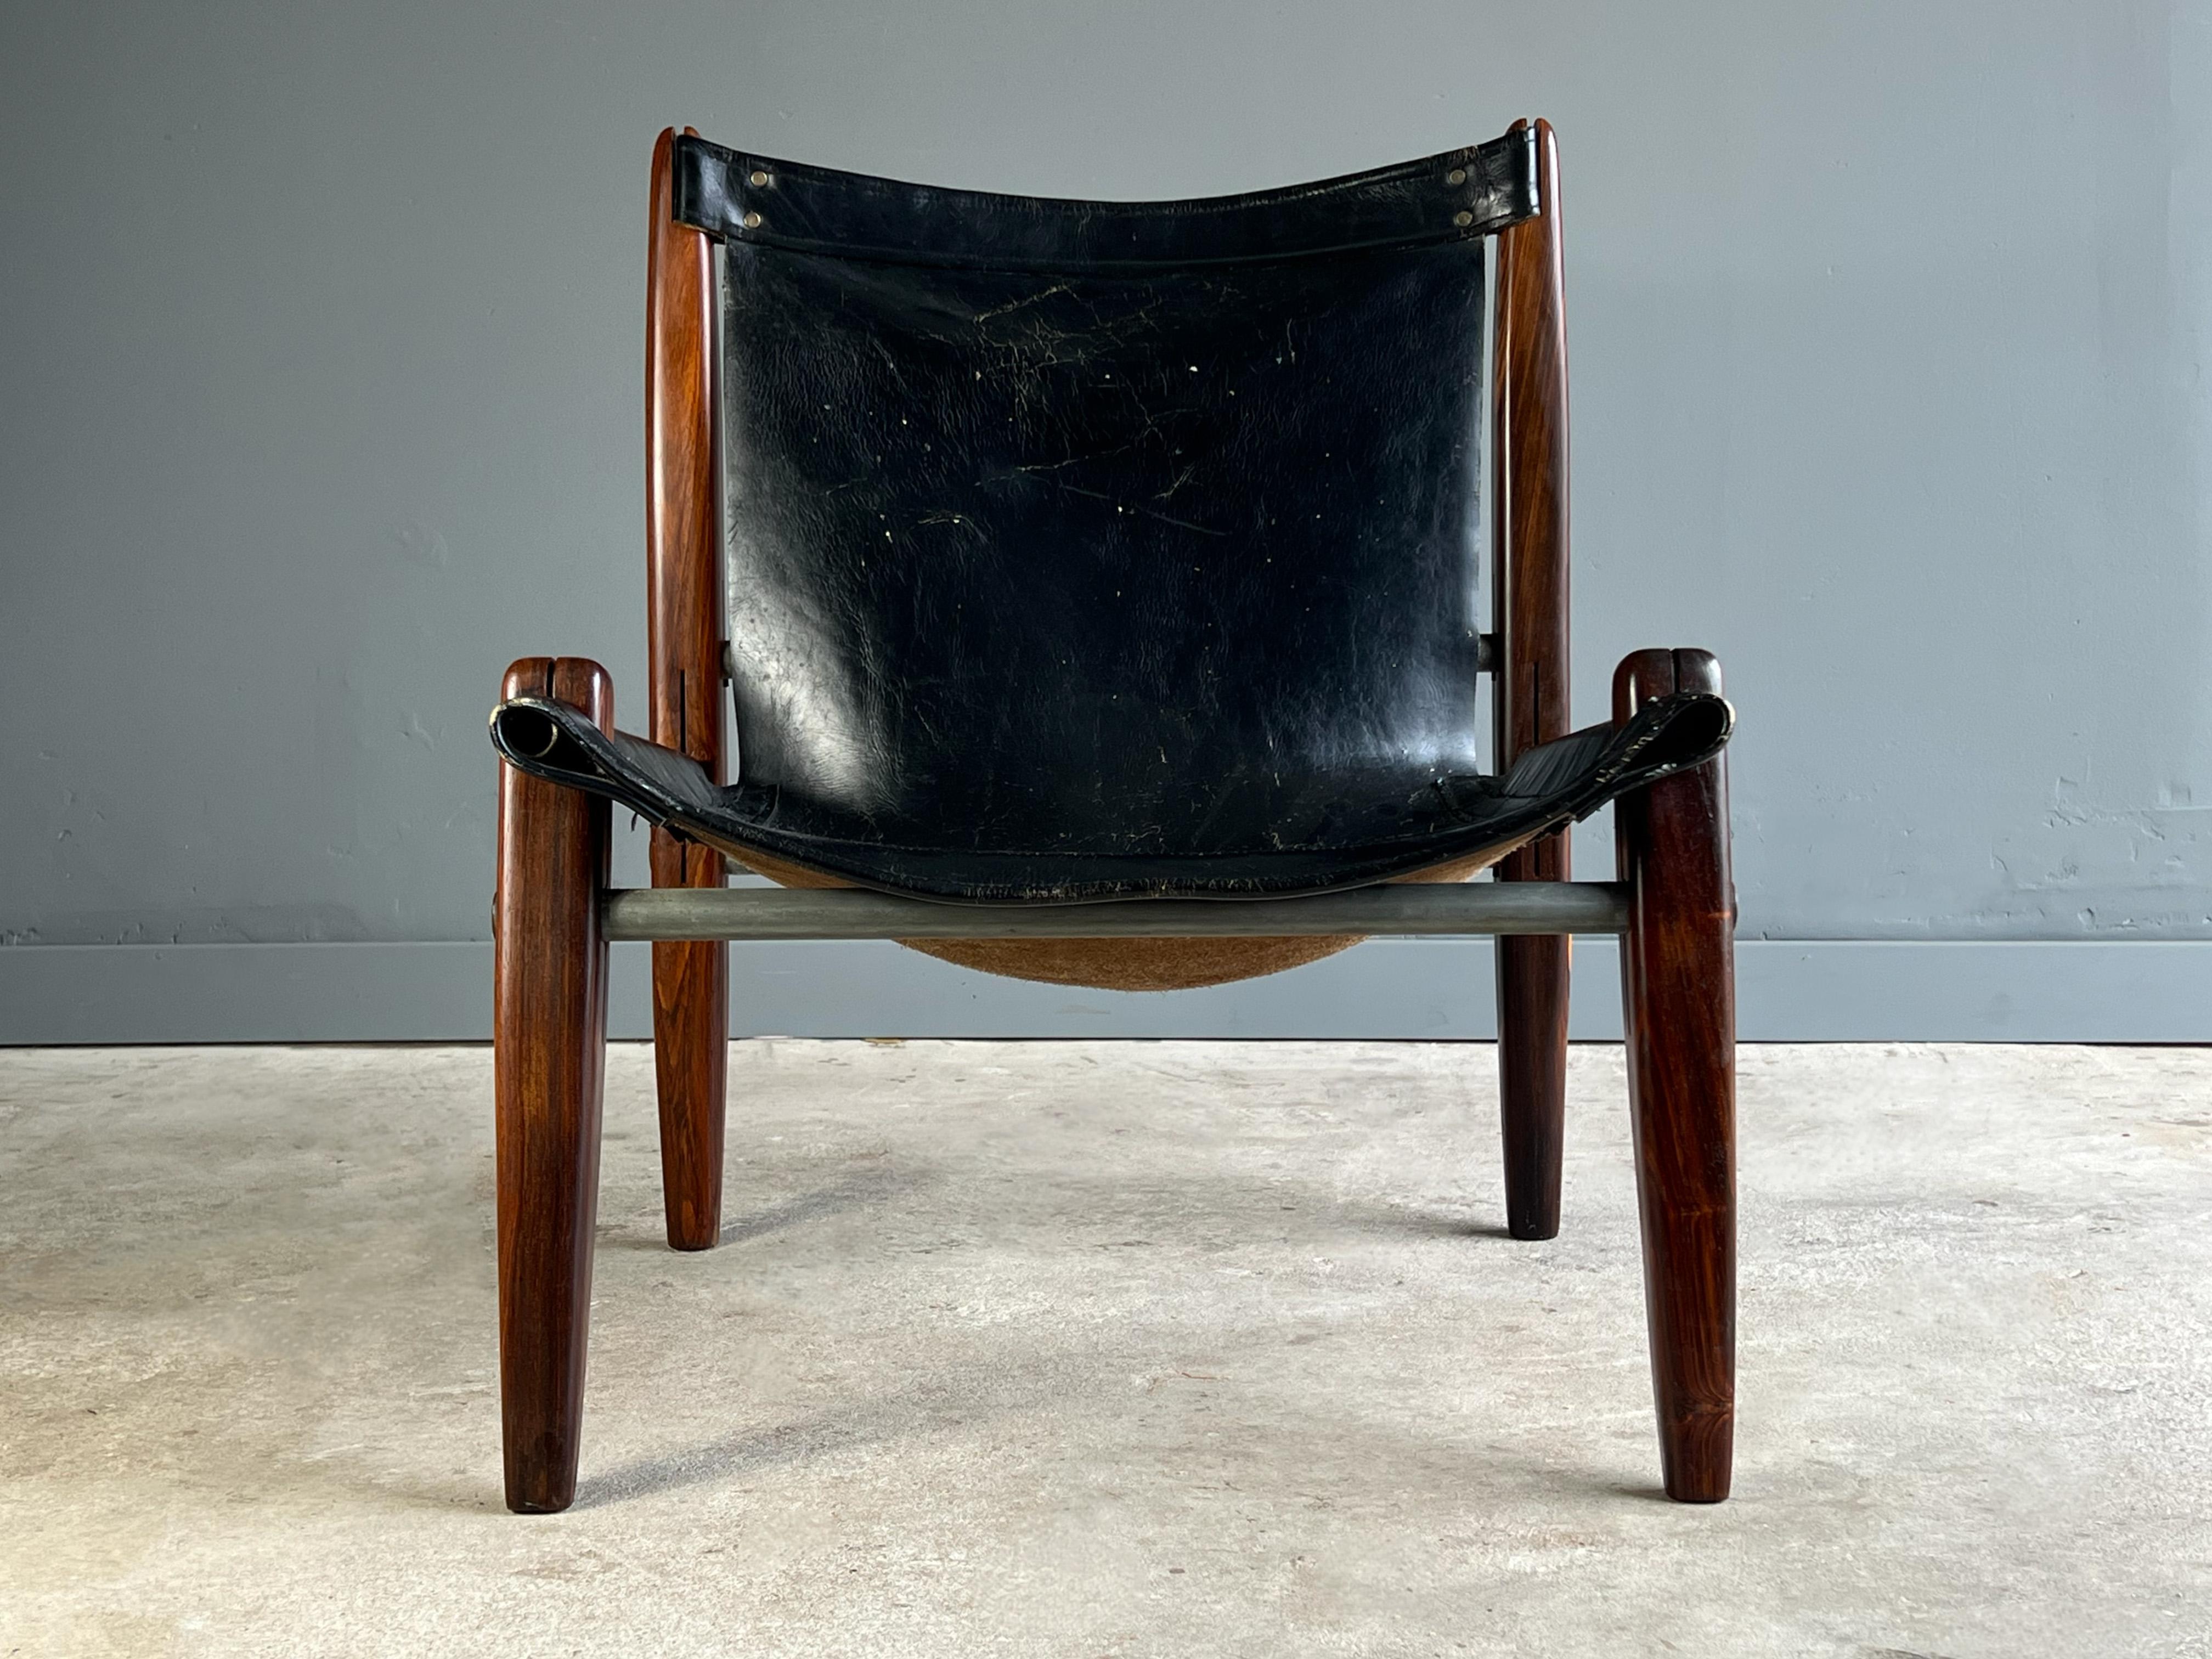 Steel Rare Mexican Modern Chair by Don Shoemaker